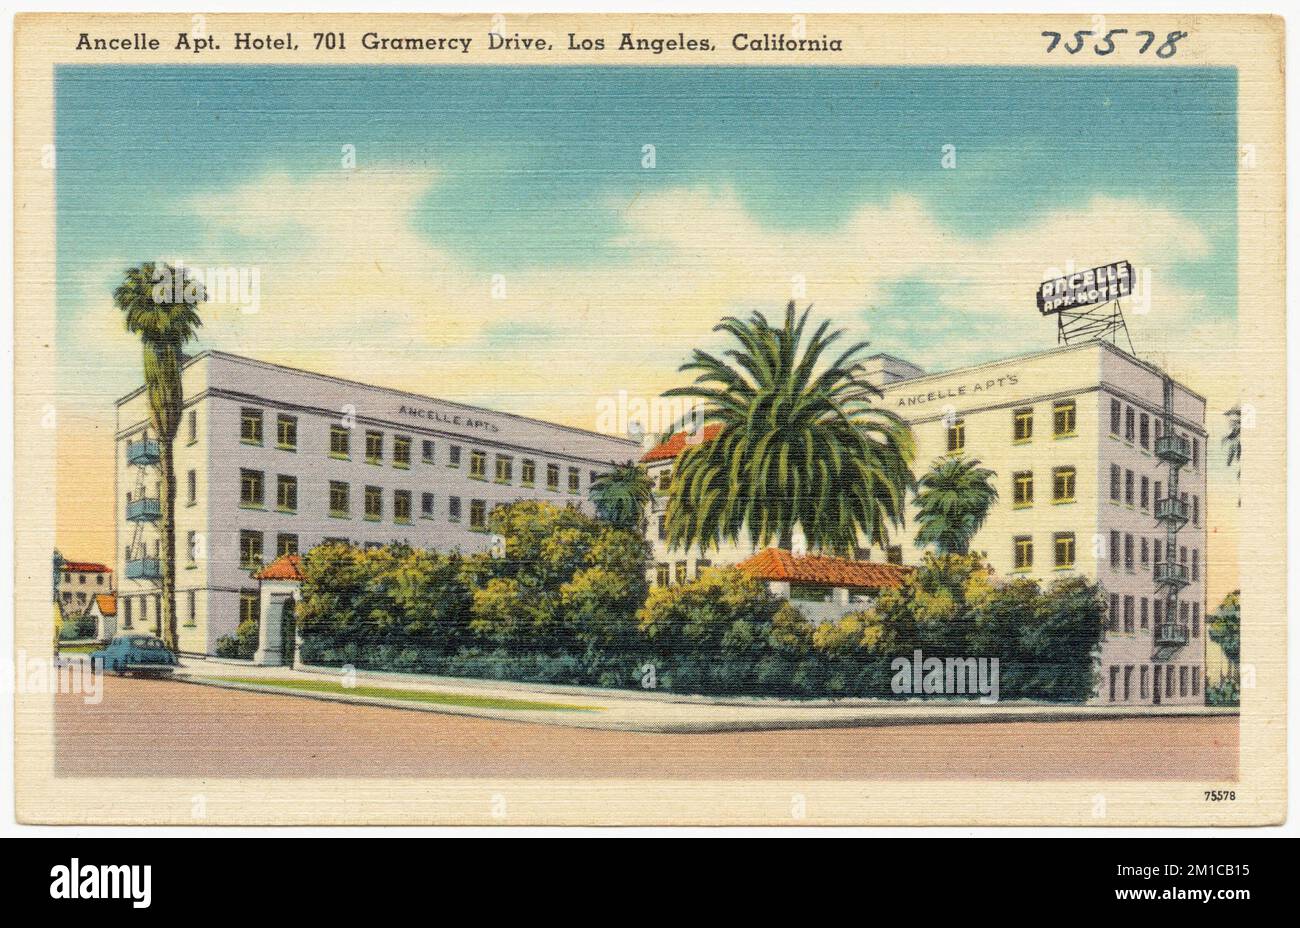 Ancelle Apt. Hotel, 701 Gramercy Drive, Los Angeles, California , Hotels, Tichnor Brothers Collection, postcards of the United States Stock Photo